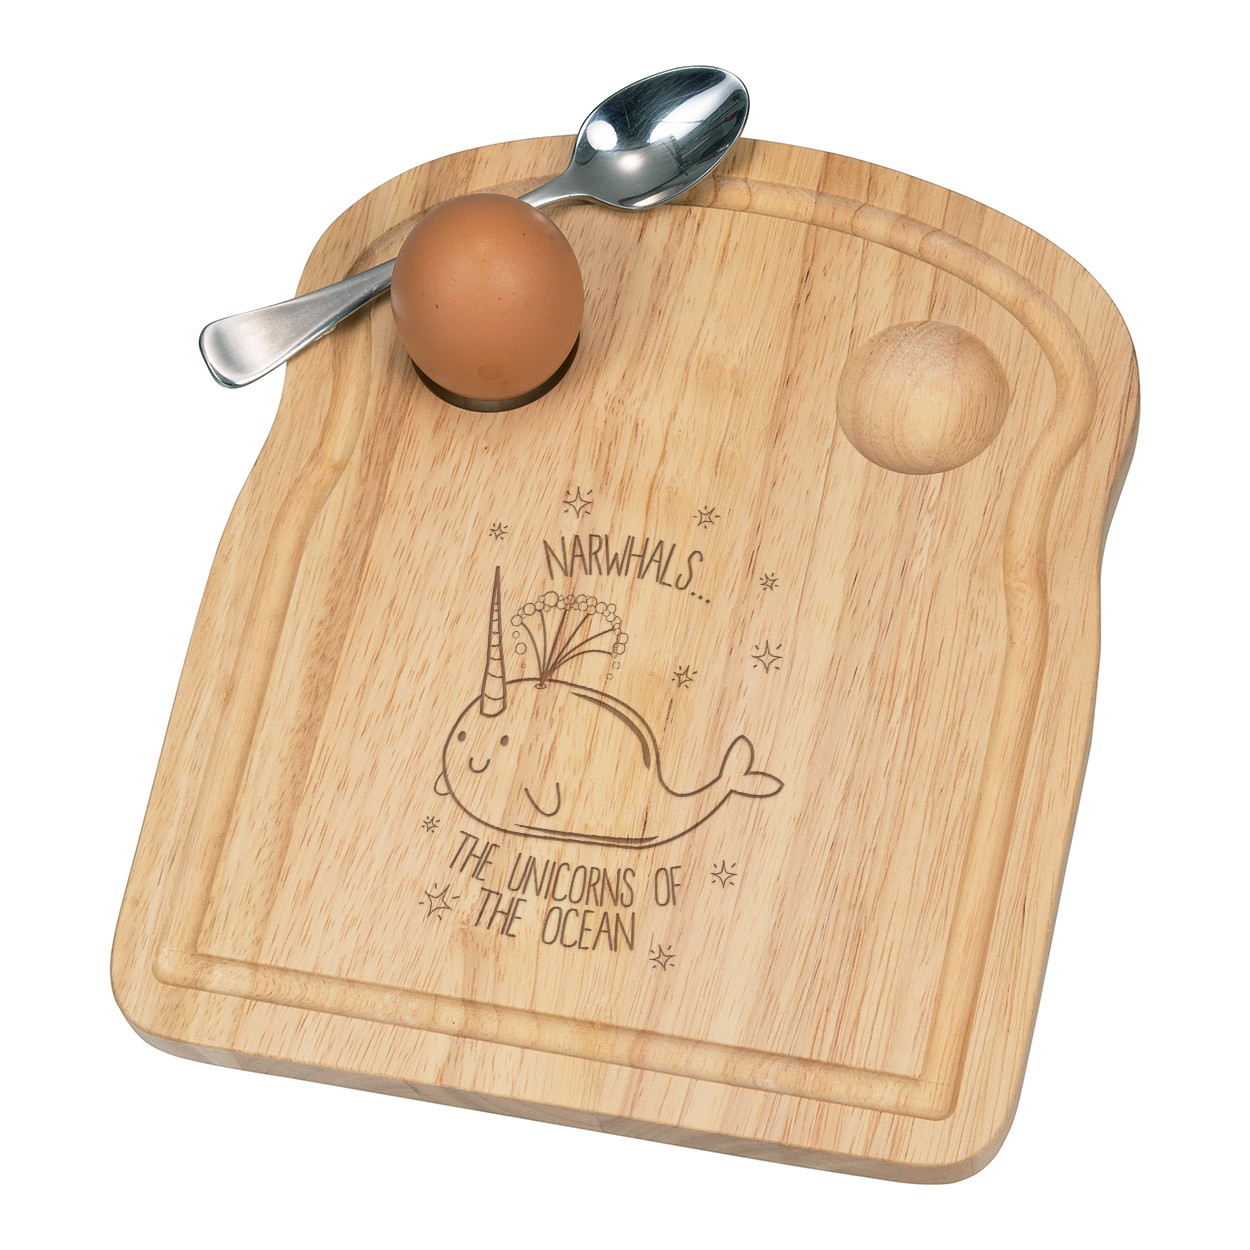 Narwhals The Unicorns Of The Ocean Breakfast Dippy Egg Cup Board Wooden